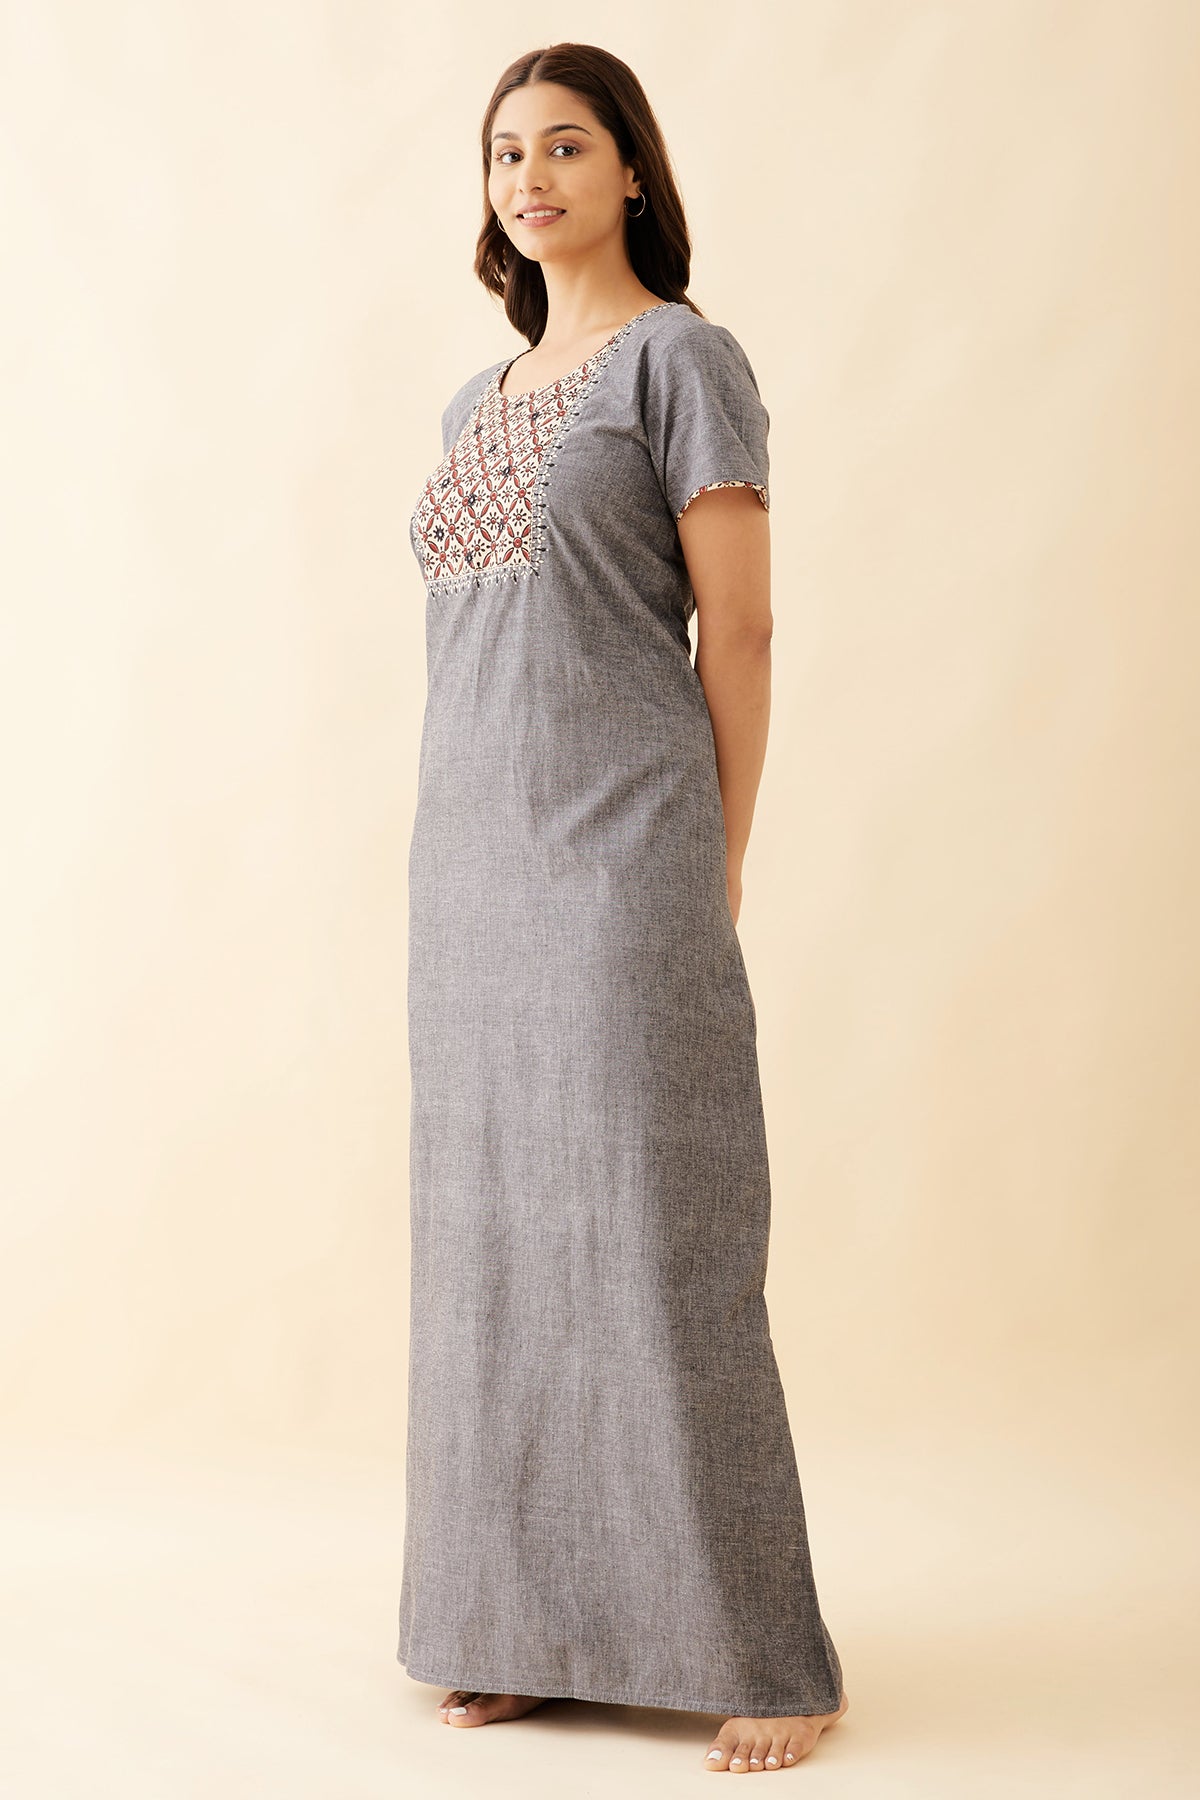 Floral Embroidered & Printed With Foil Mirror Embellished Yoke Nighty - Grey